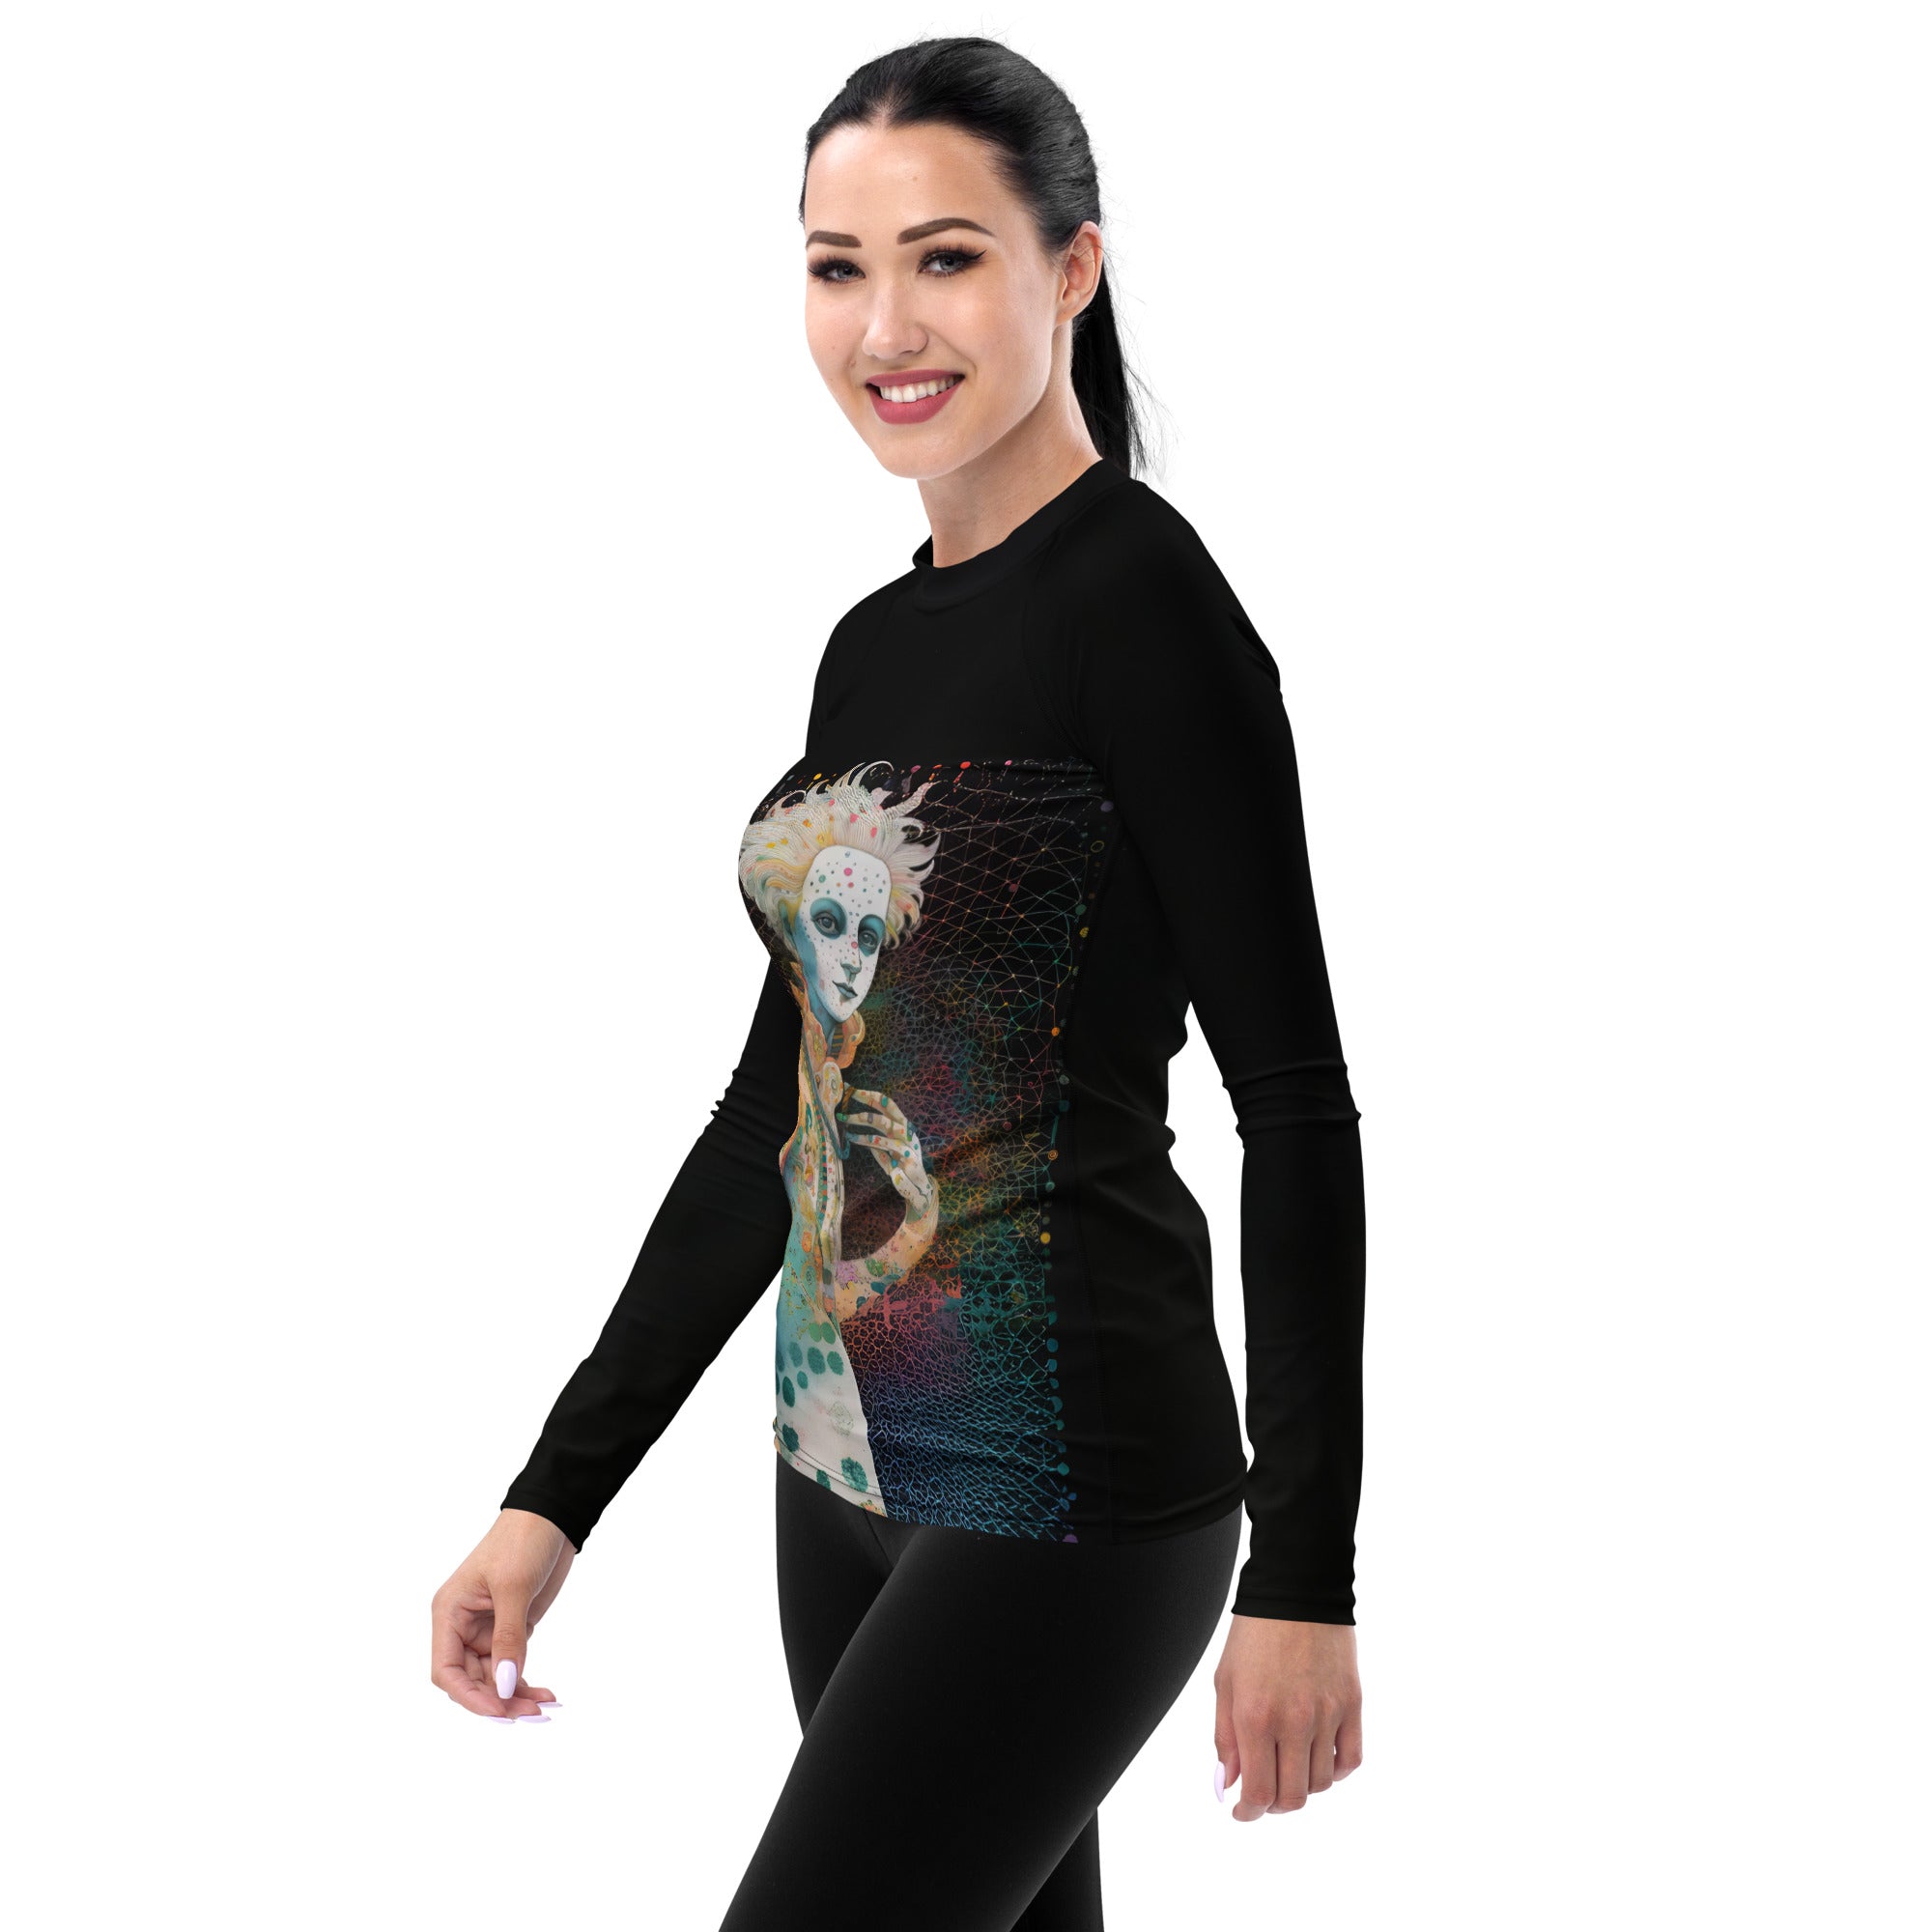 Harmony Melodies women's rash guard displayed flat for viewing.